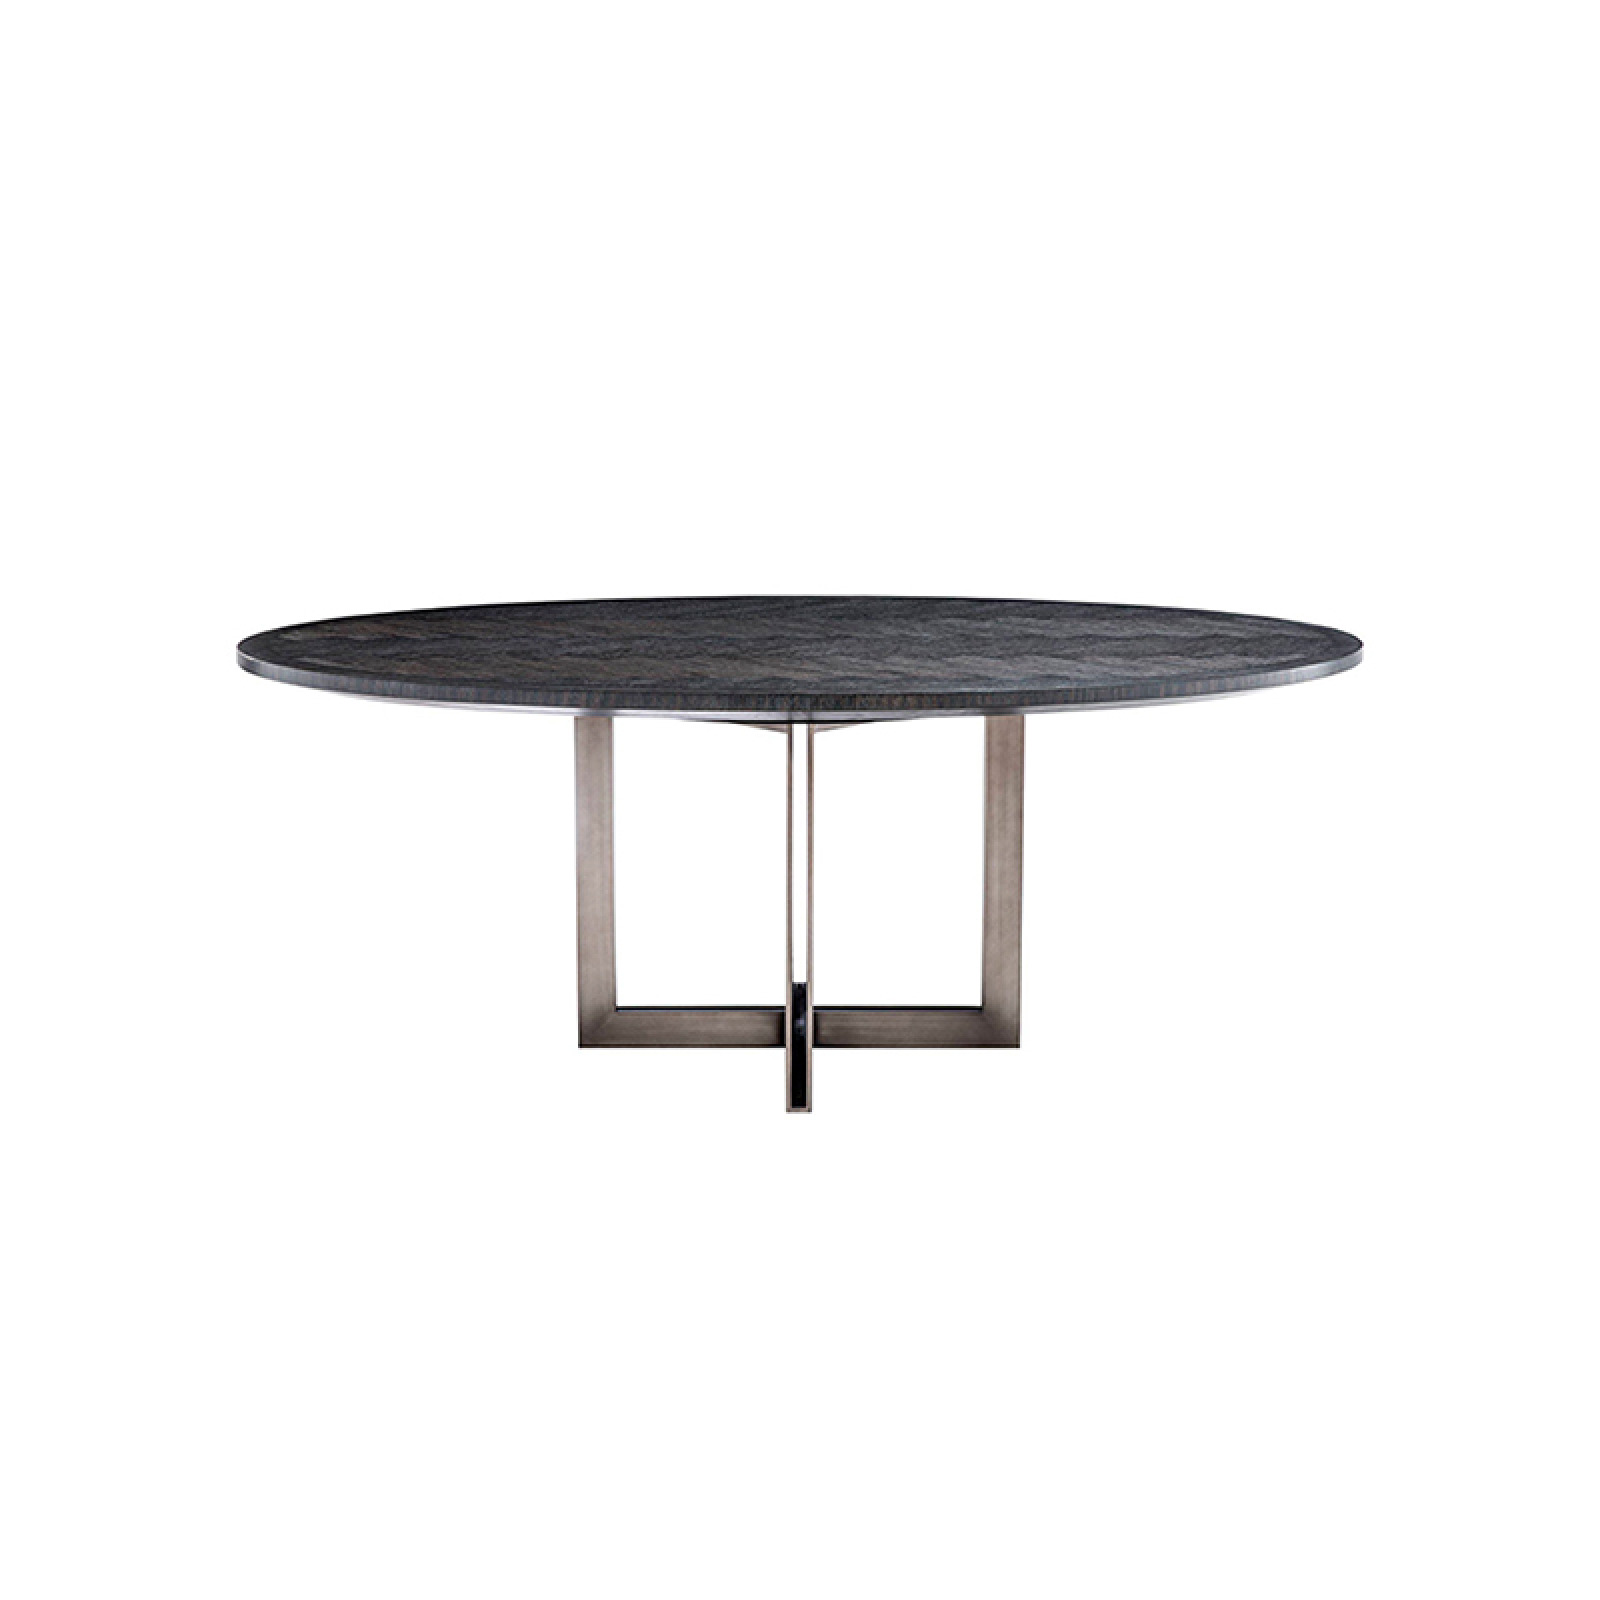 Melchior Charcoal oval dining table